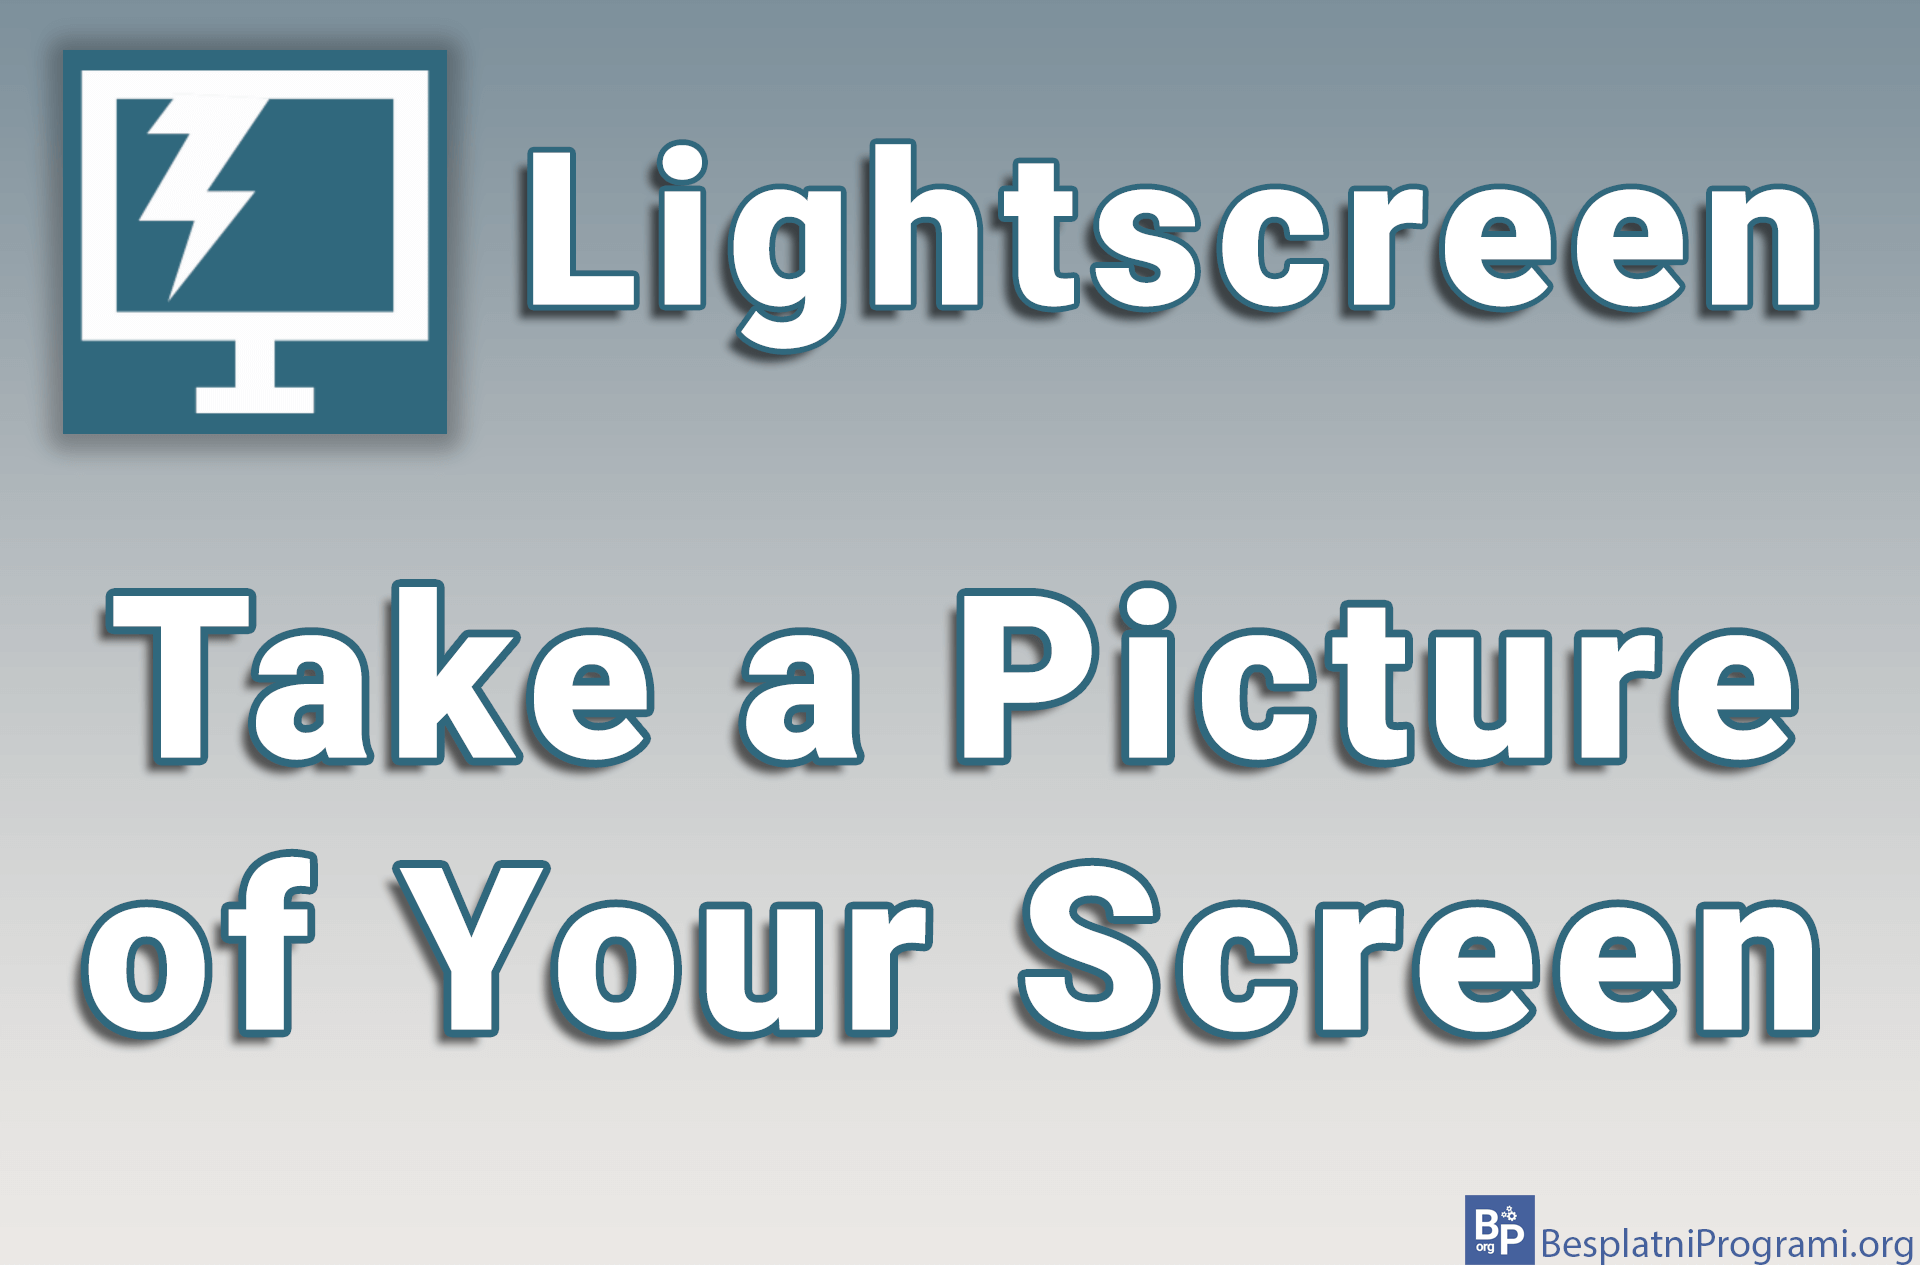 Lightscreen – Take a Picture of Your Screen